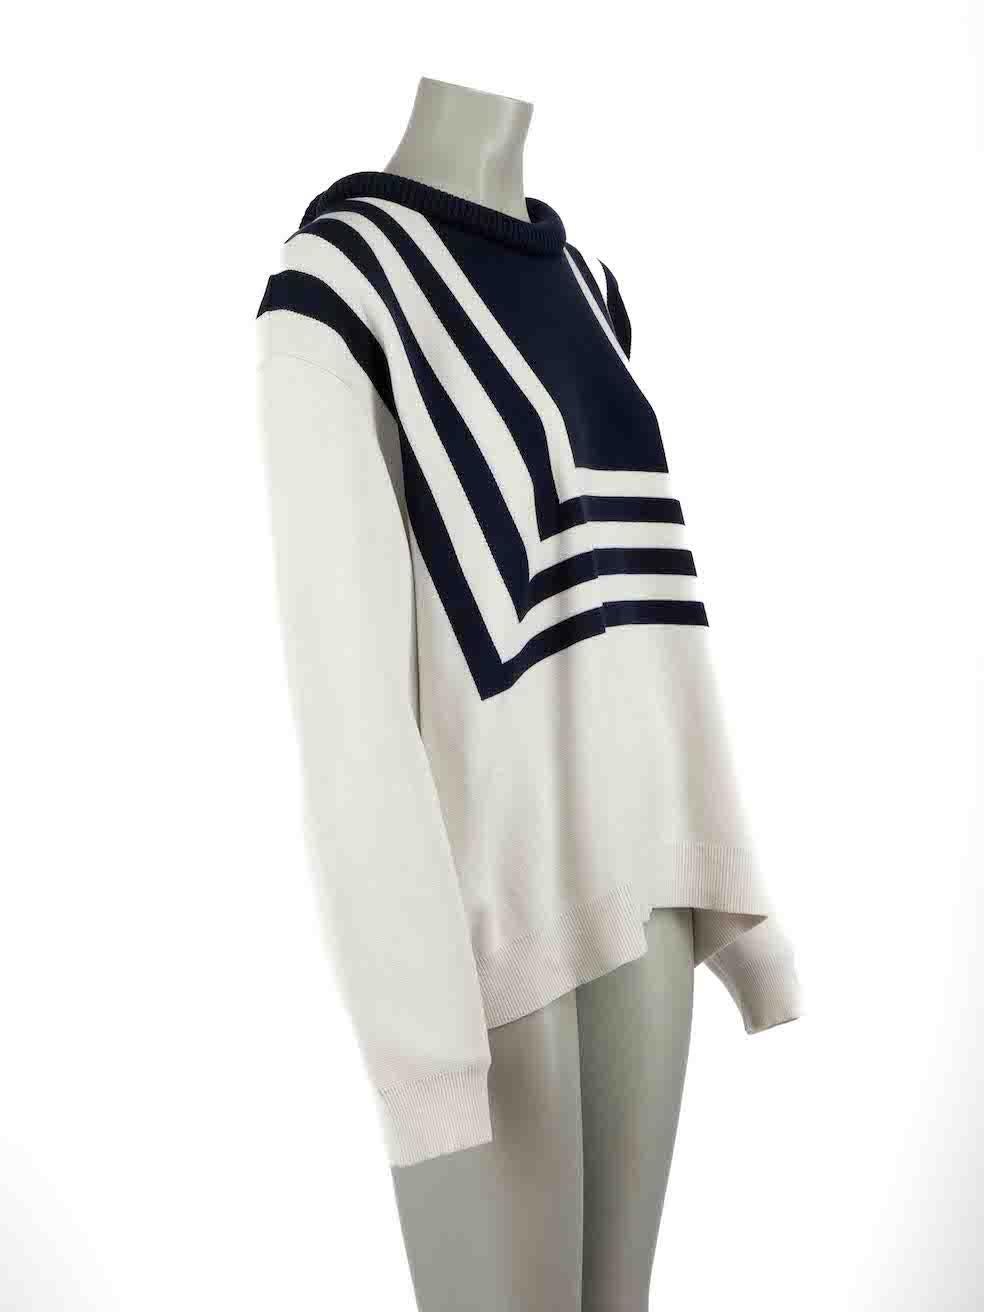 CONDITION is Good. General wear to jumper is evident. Moderate signs of wear to the front and both sleeves with discoloured marks on this used Oscar de la Renta designer resale item.
 
 Details
 White and navy
 Cotton
 Knitted jumper
 Round